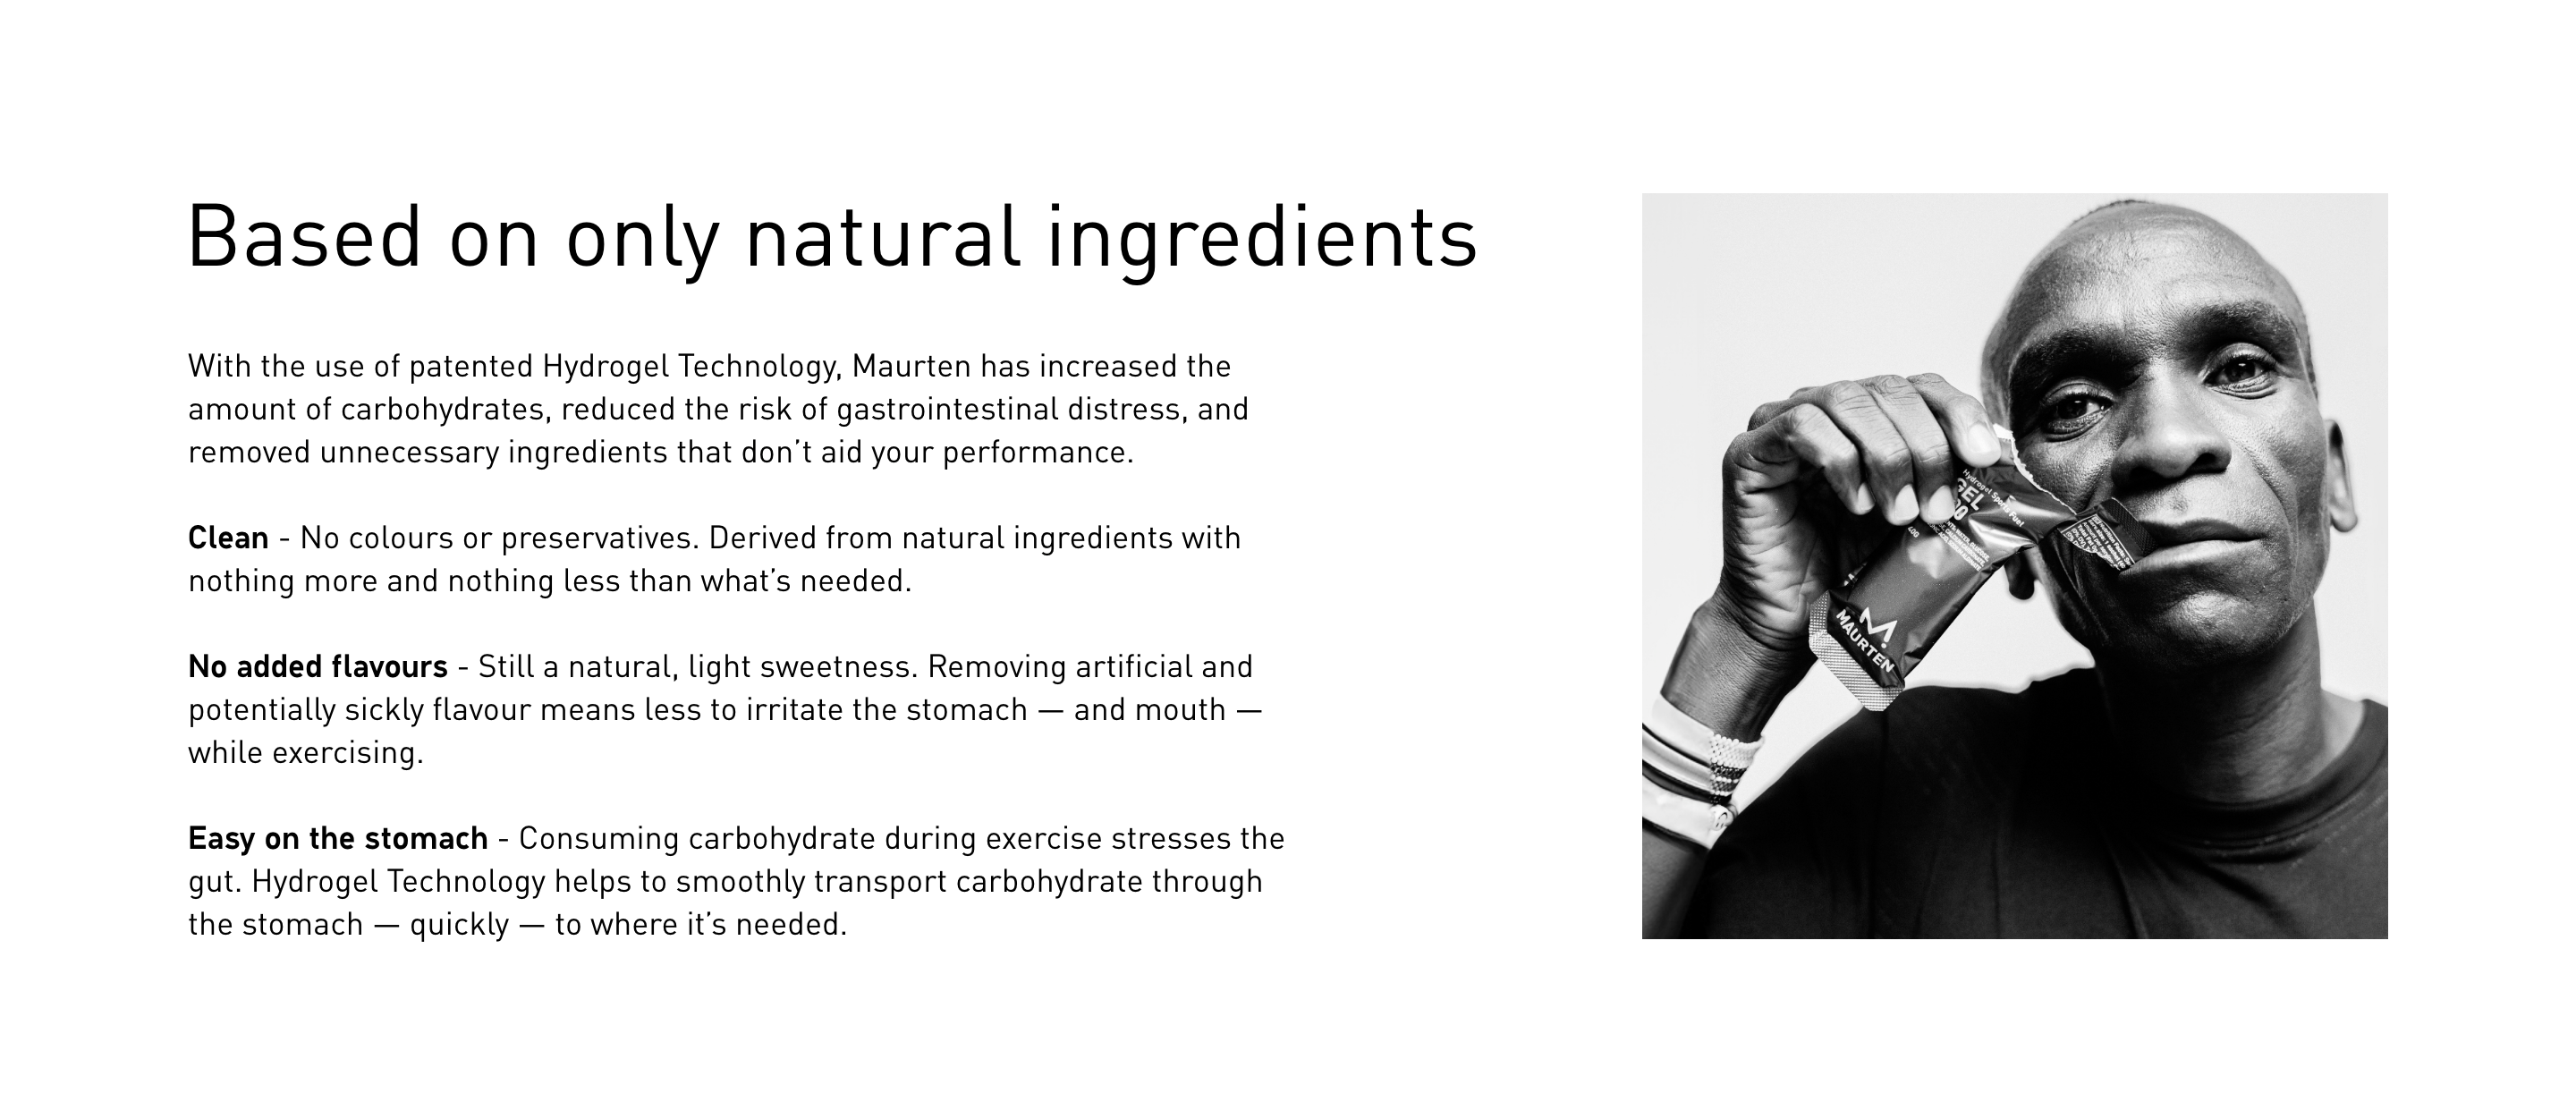 Based on only natural ingredients